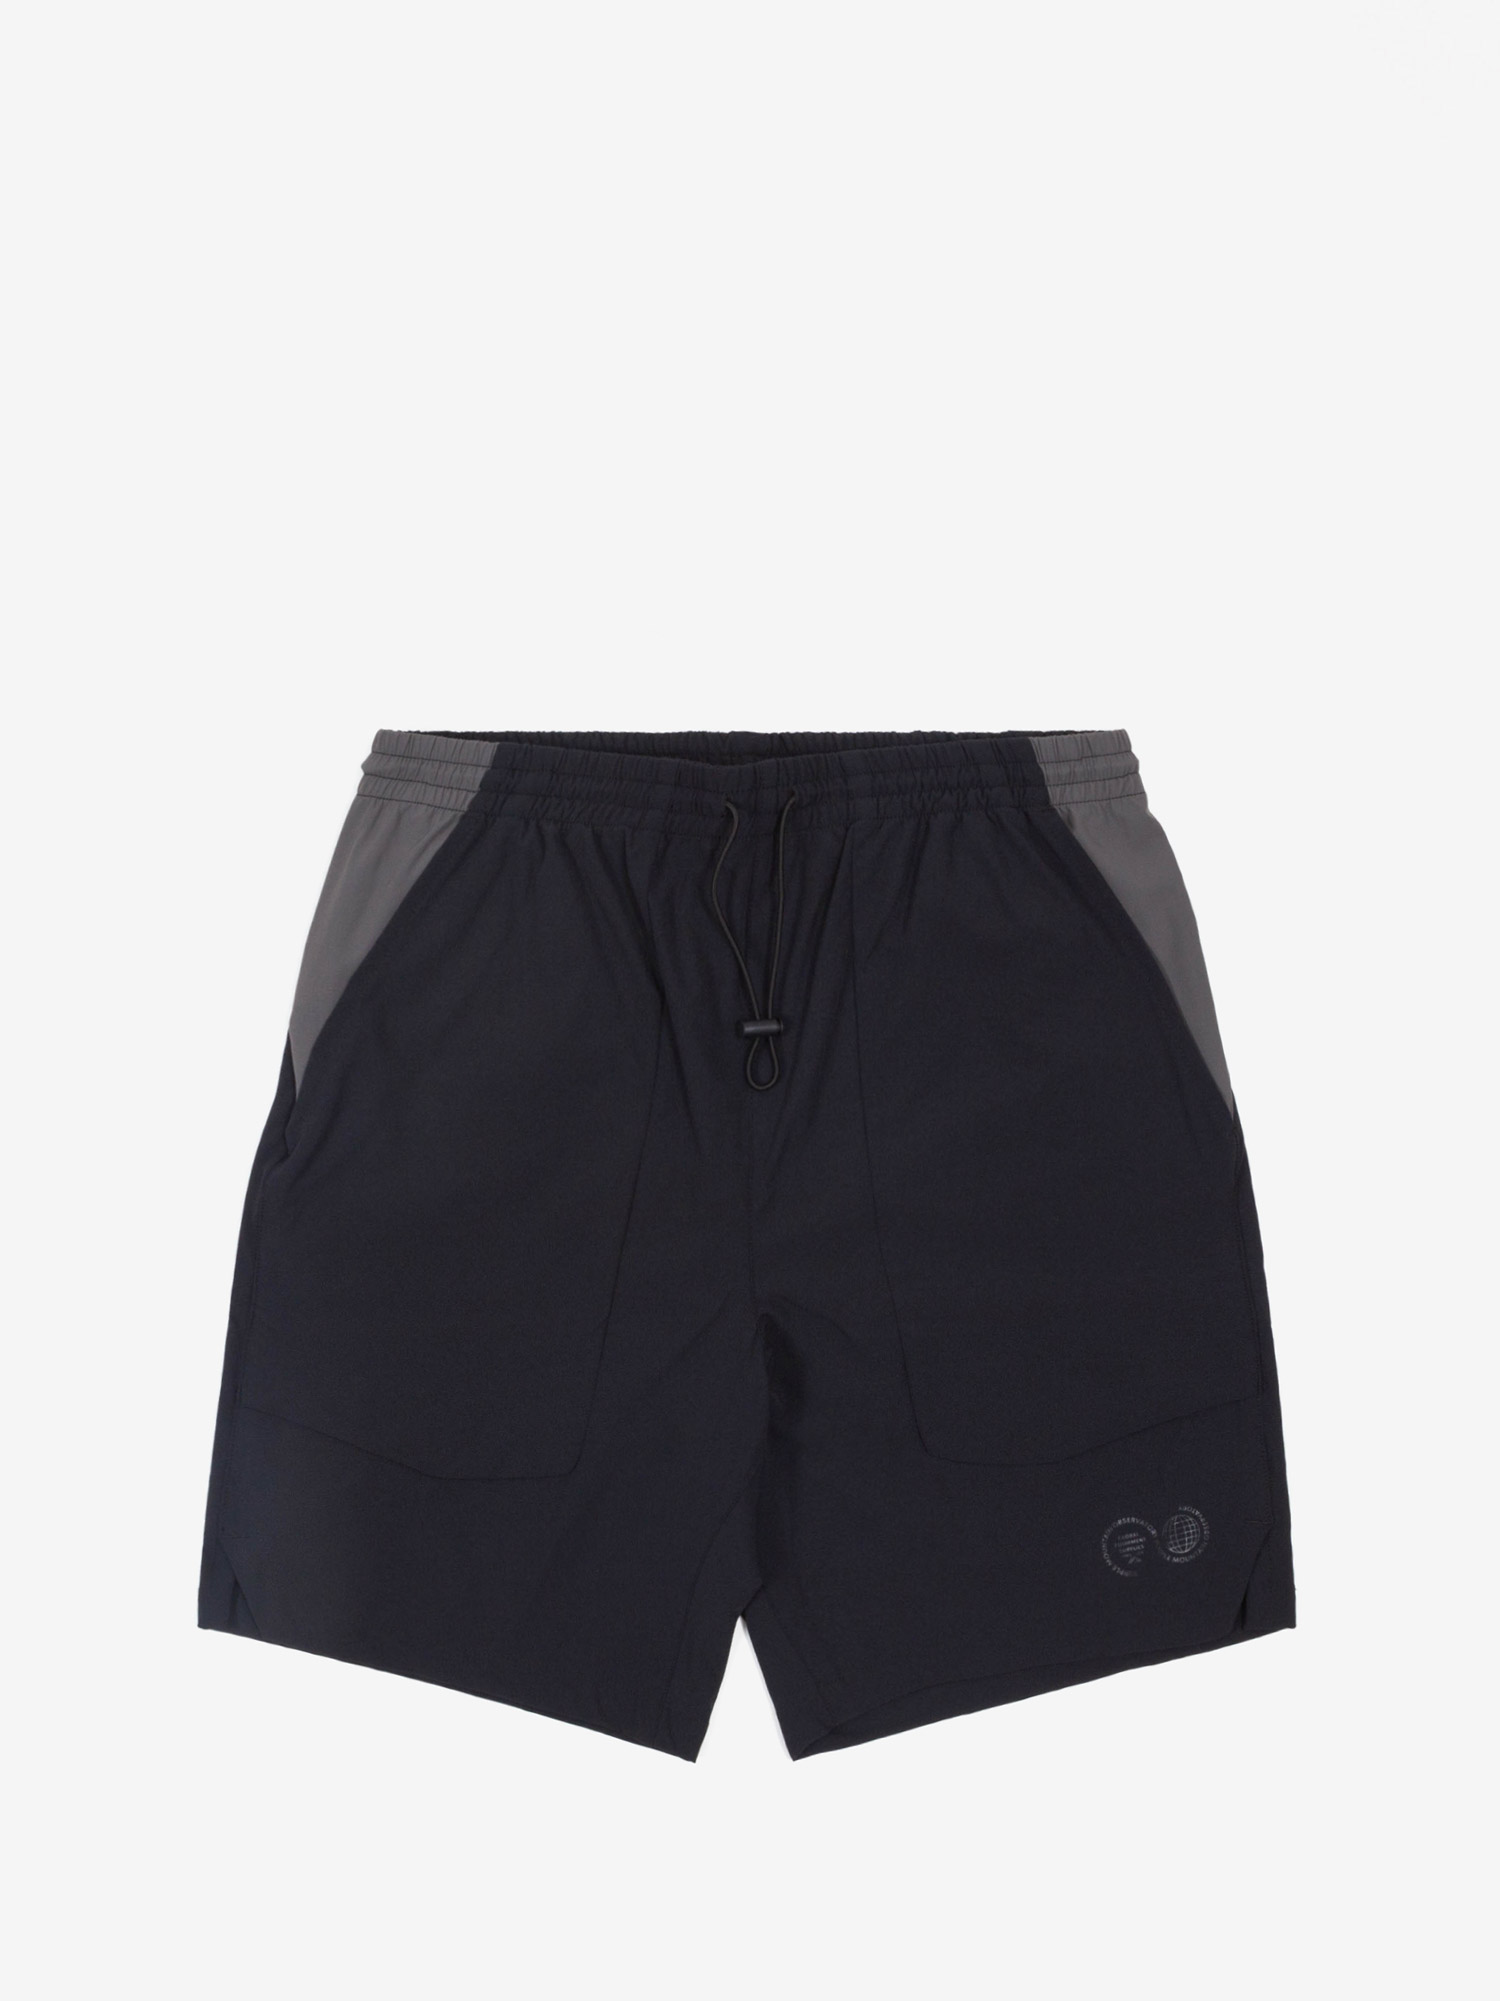 Featured image for “BLOCKED CLIMBING SHORT BLACK”